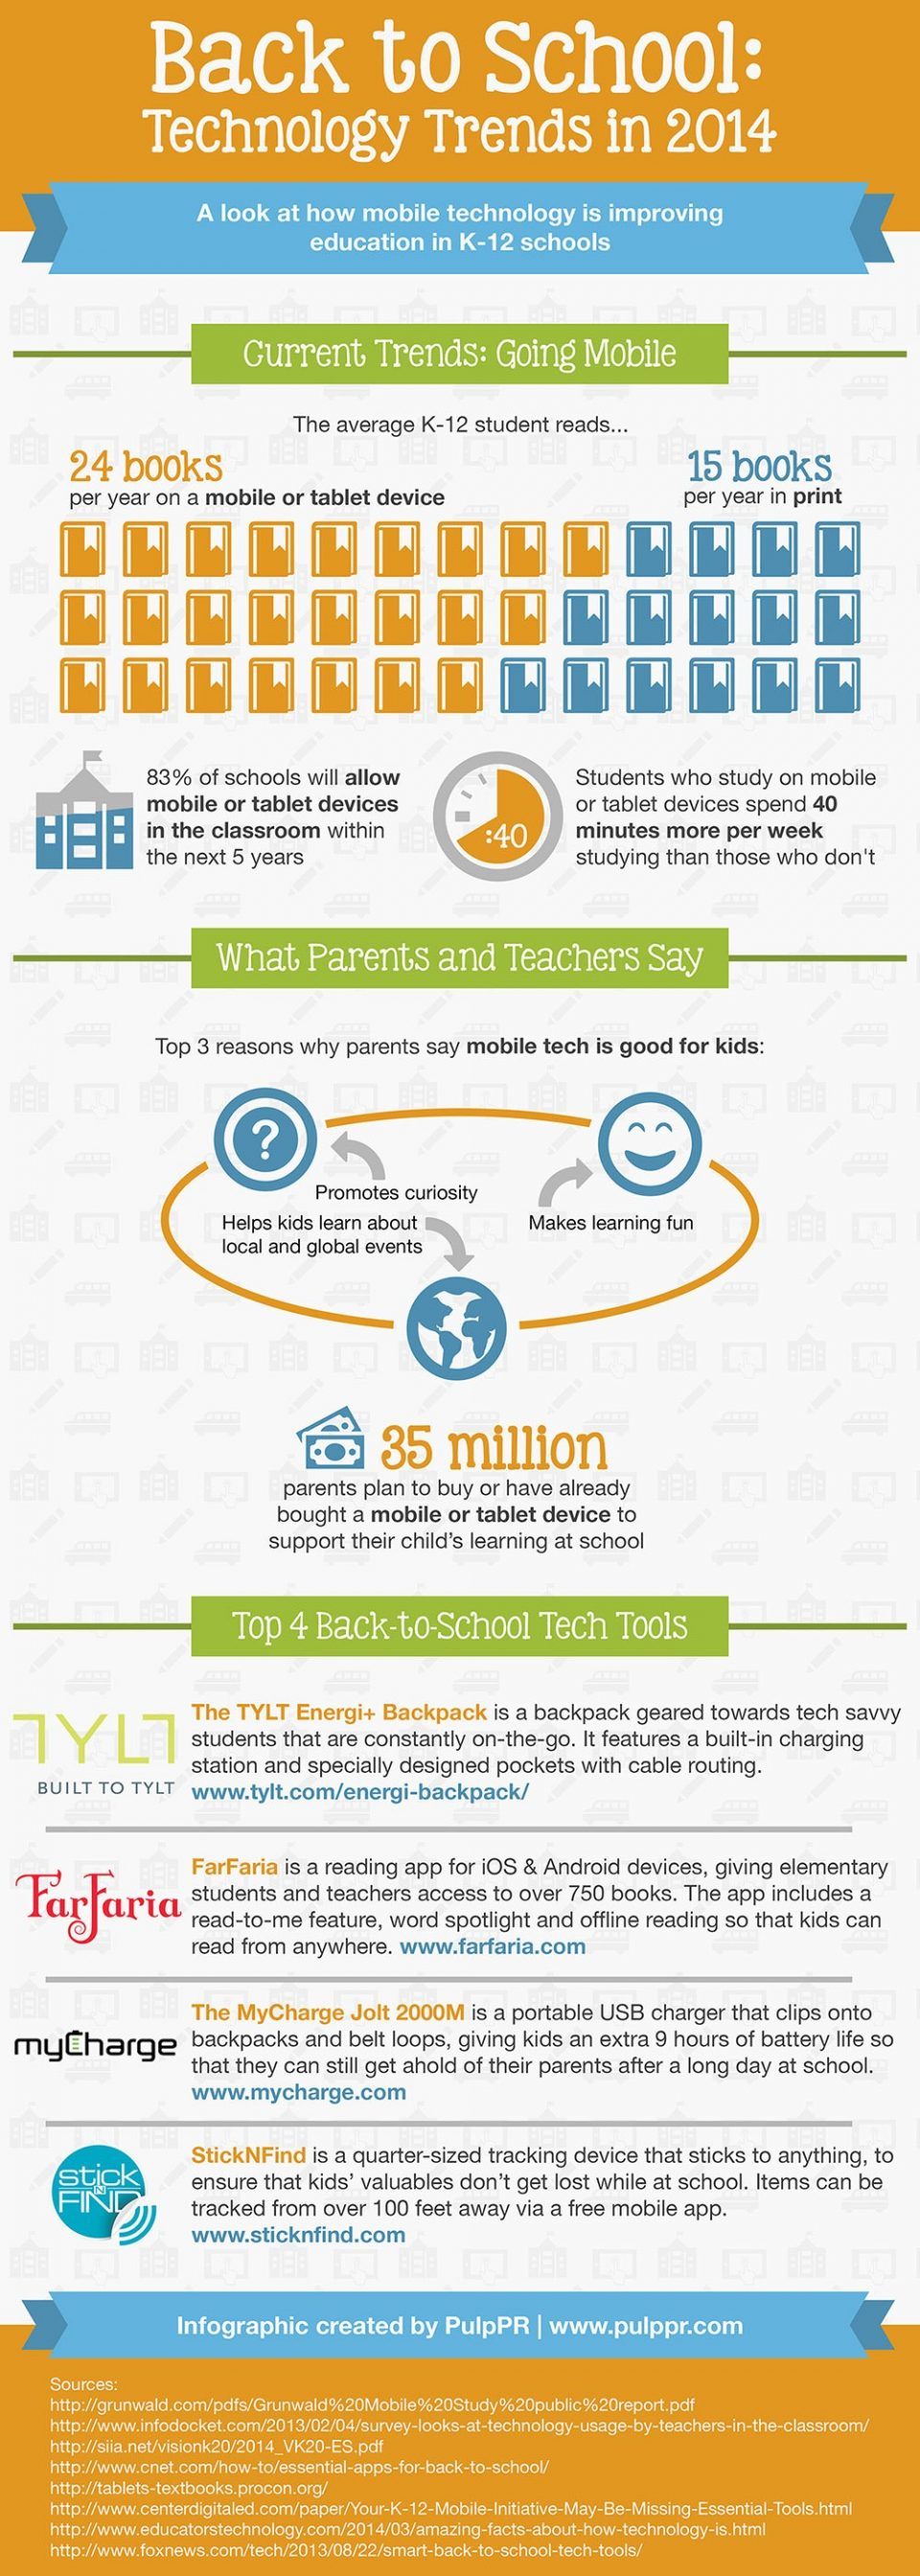 Back to School Infographic: Mobile Technology Trends in 2014